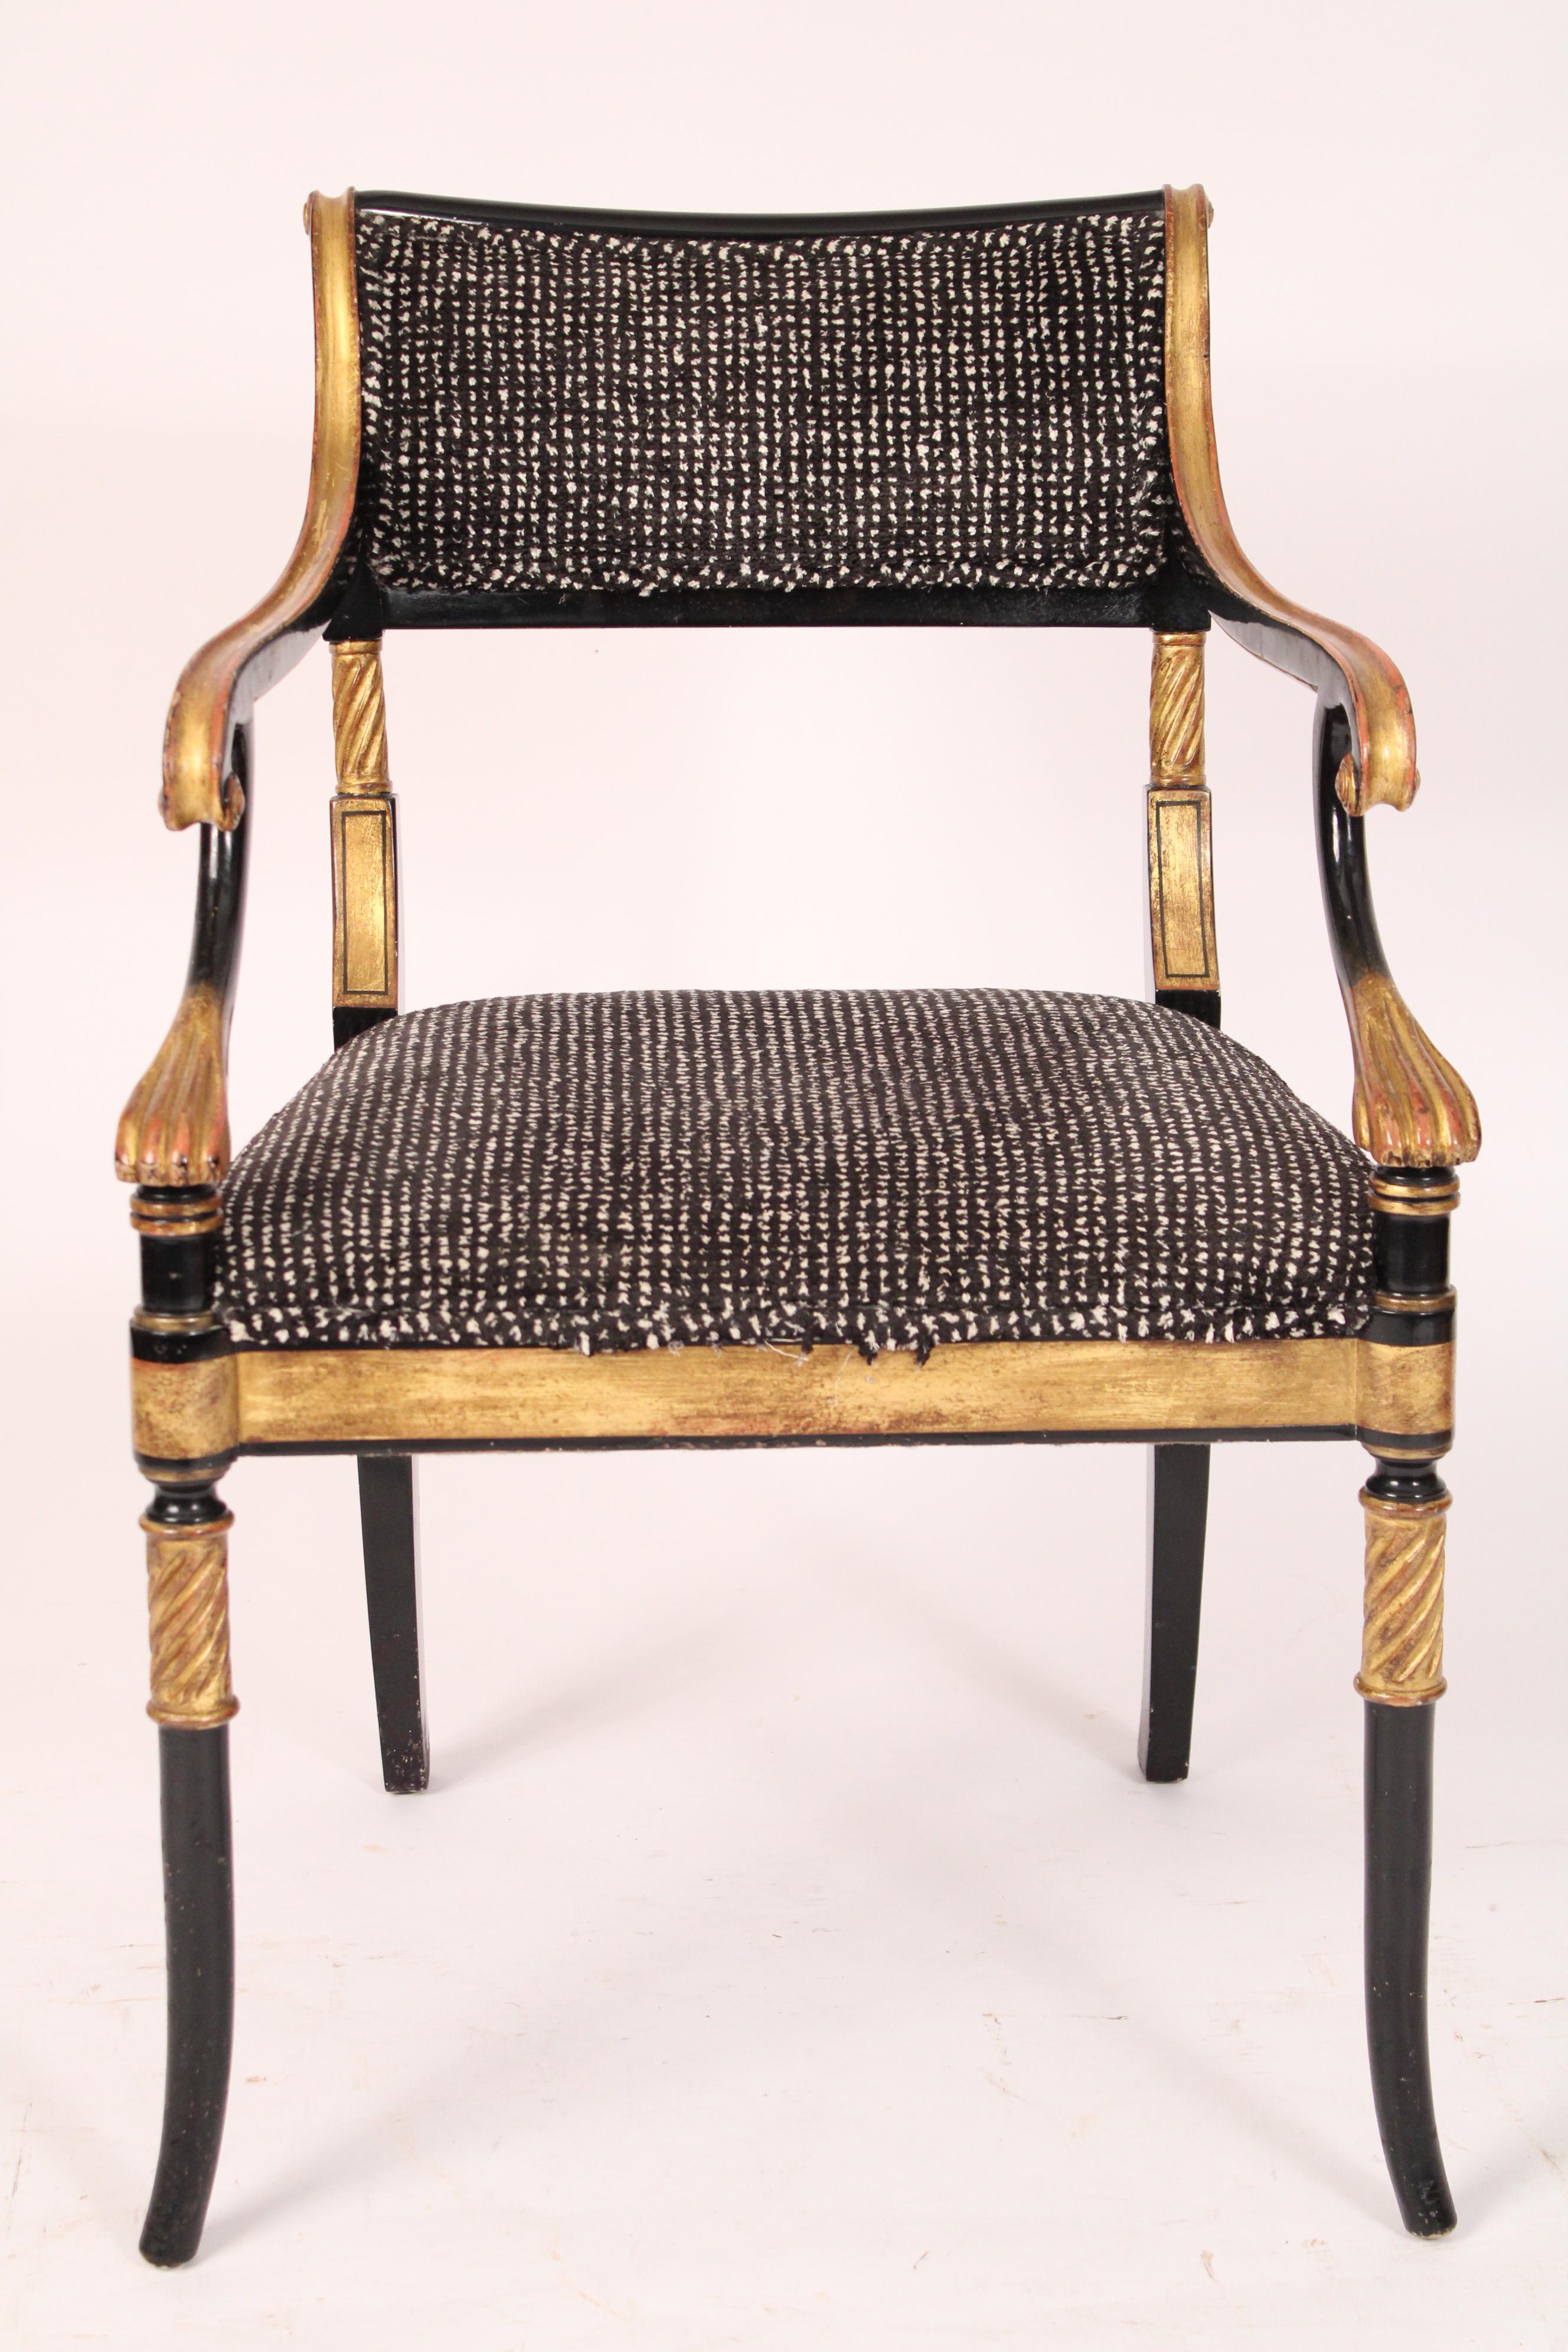 English Regency Style black lacquer and gilt decorated armchair, late 20th century. The seat dimensions are, seat width 18.5